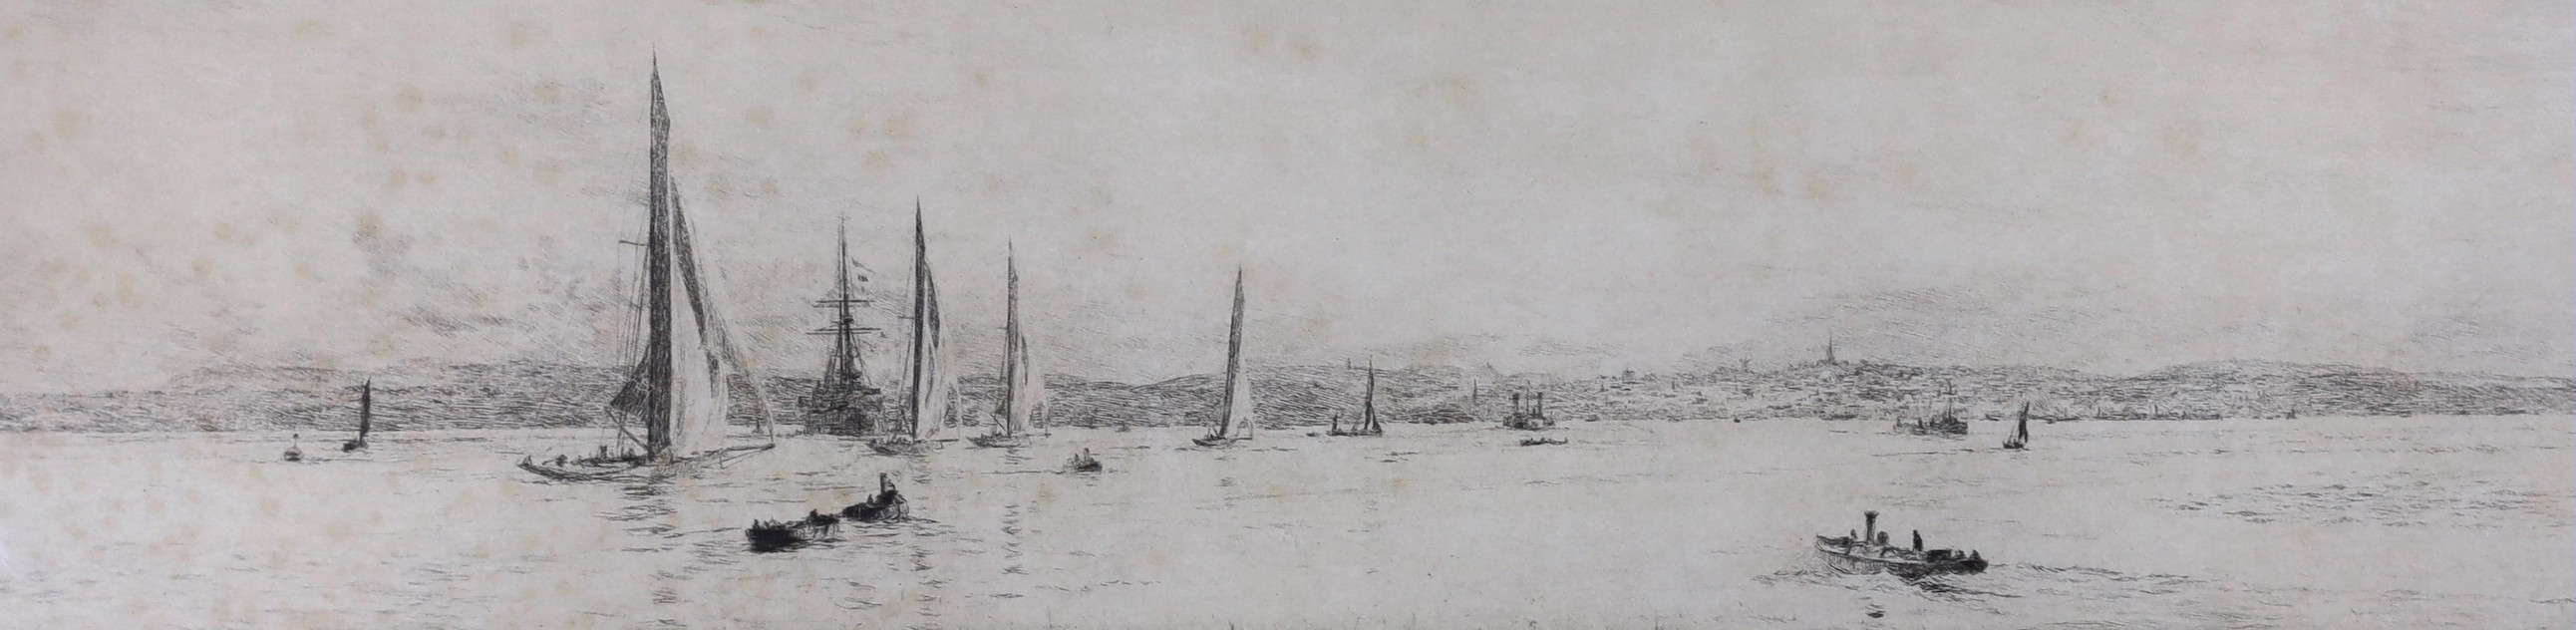 William Lionel Wyllie (1851-1931), drypoint etching, 'Yachts on the Solent', signed in pencil, 9 x 33cm